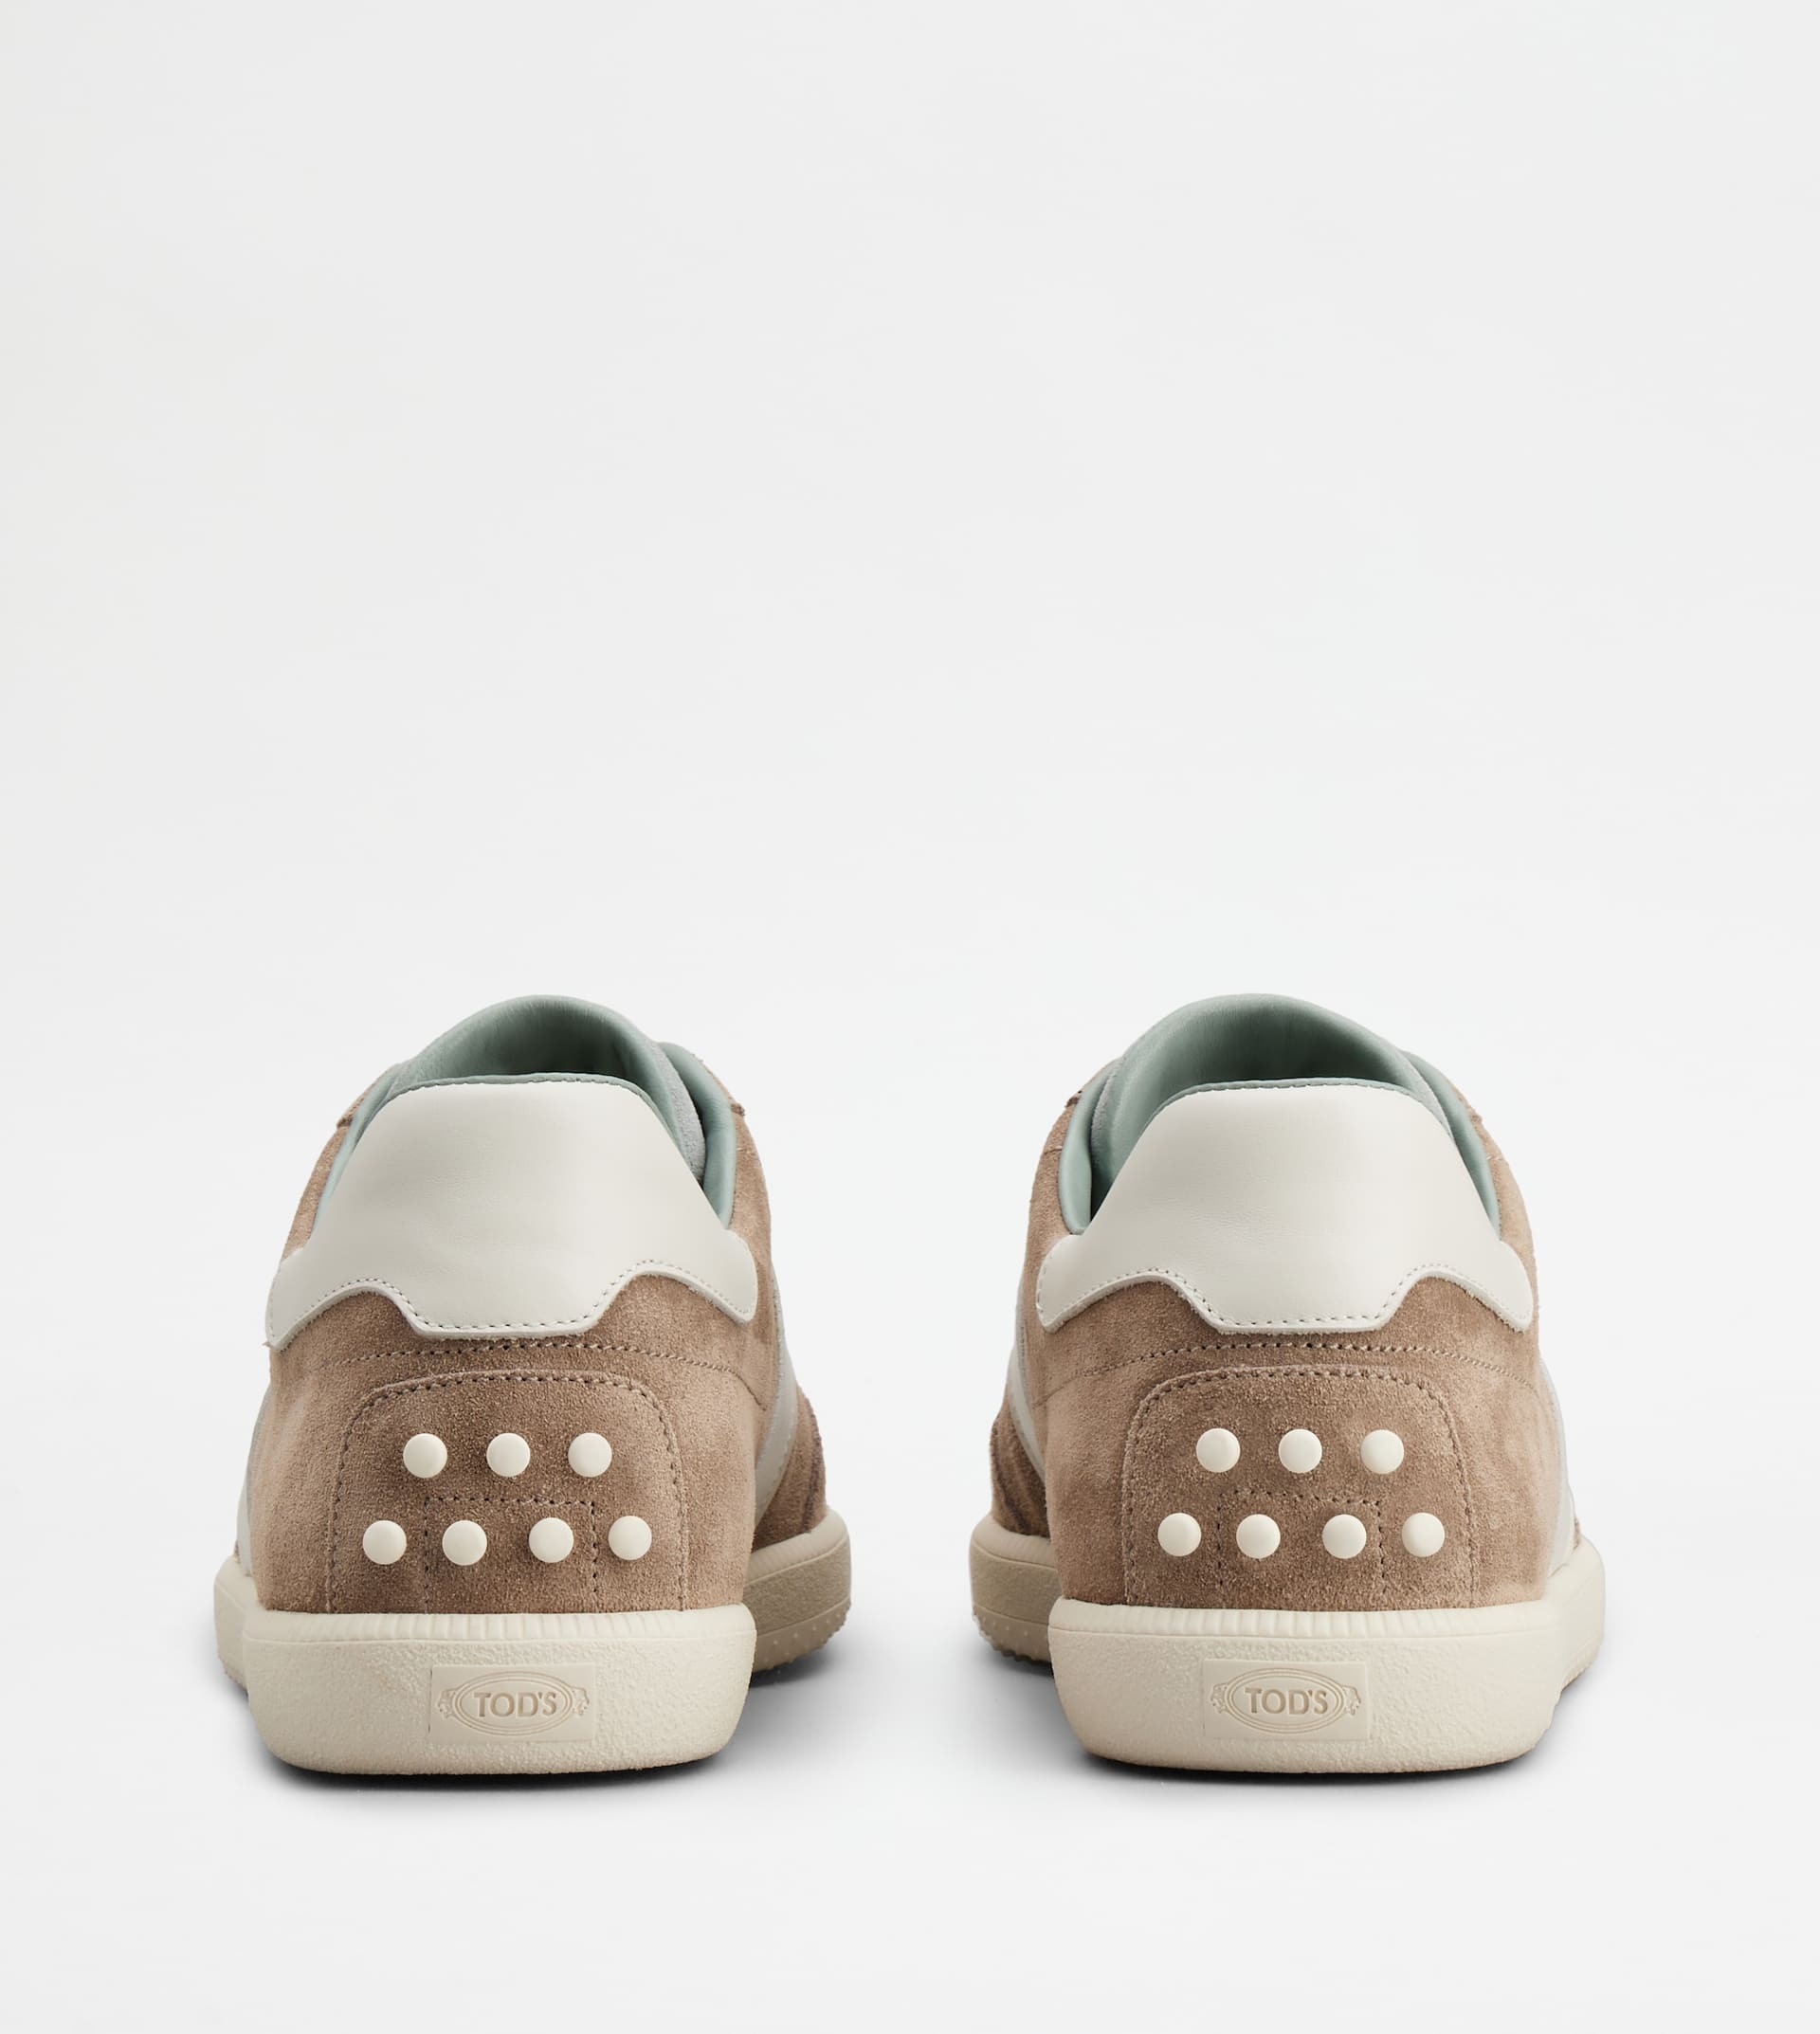 TOD'S TABS SNEAKERS IN SUEDE - BROWN, WHITE, LIGHT BLUE - 2